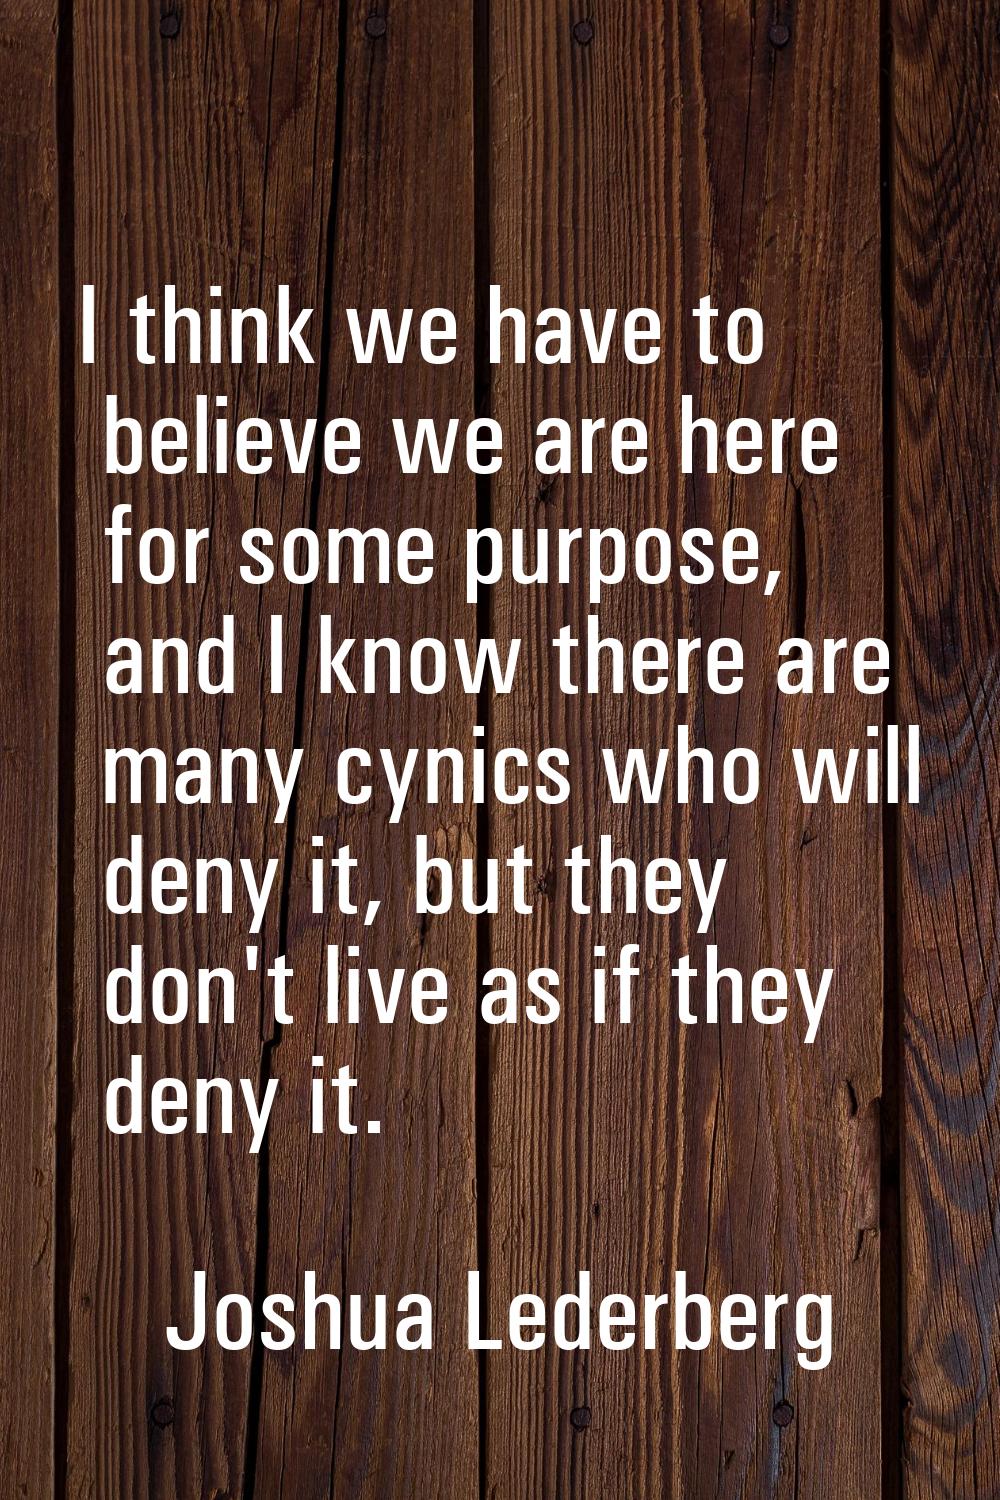 I think we have to believe we are here for some purpose, and I know there are many cynics who will 